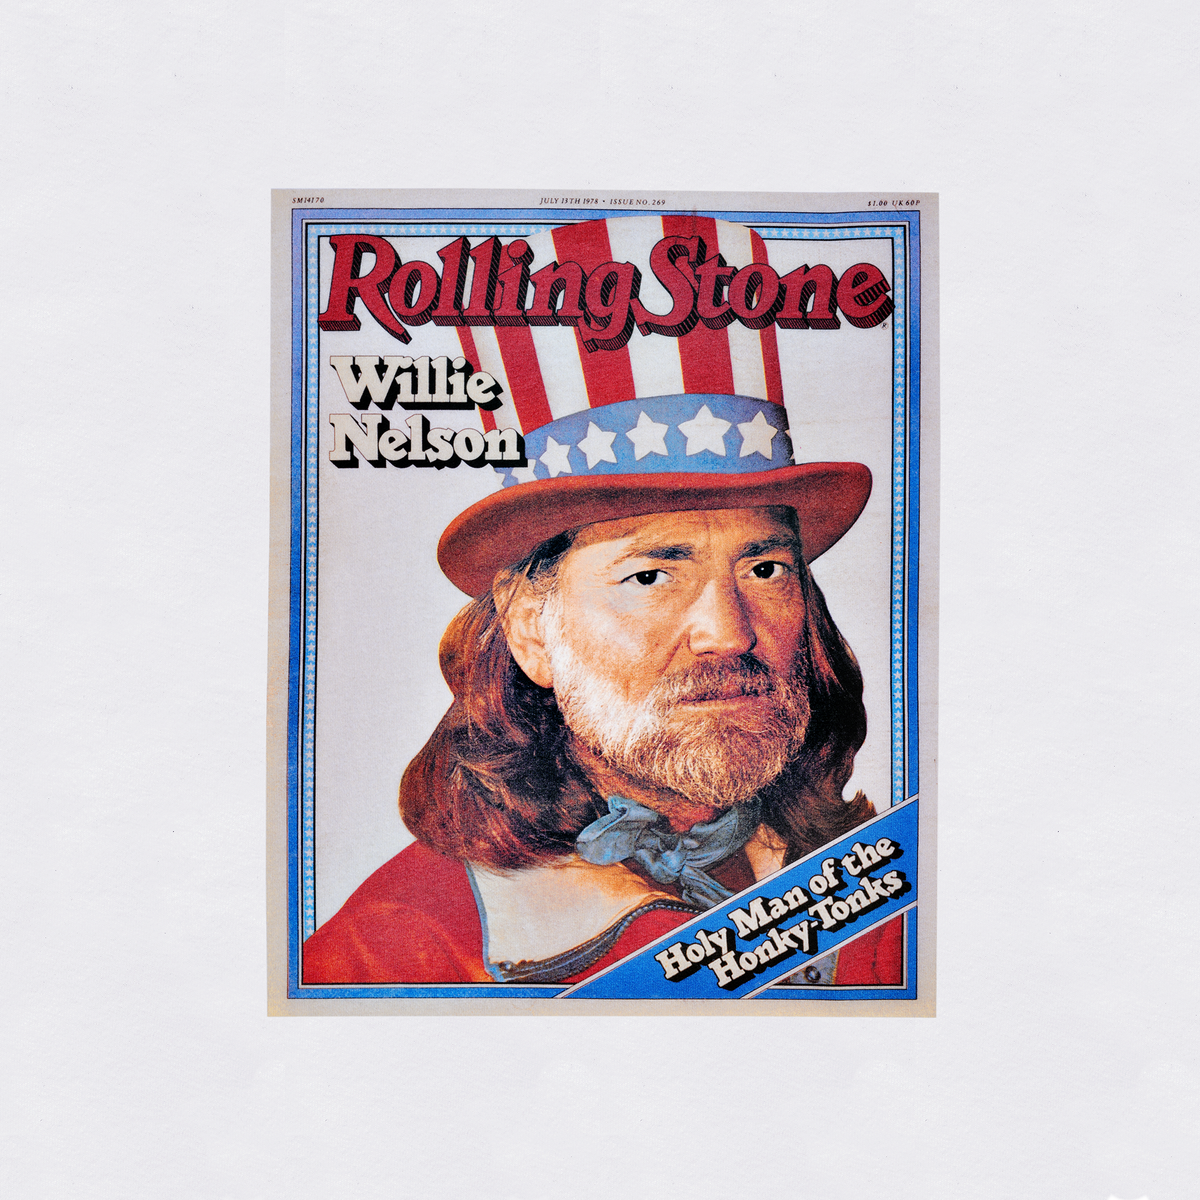 The Willie Nelson Cover Tee